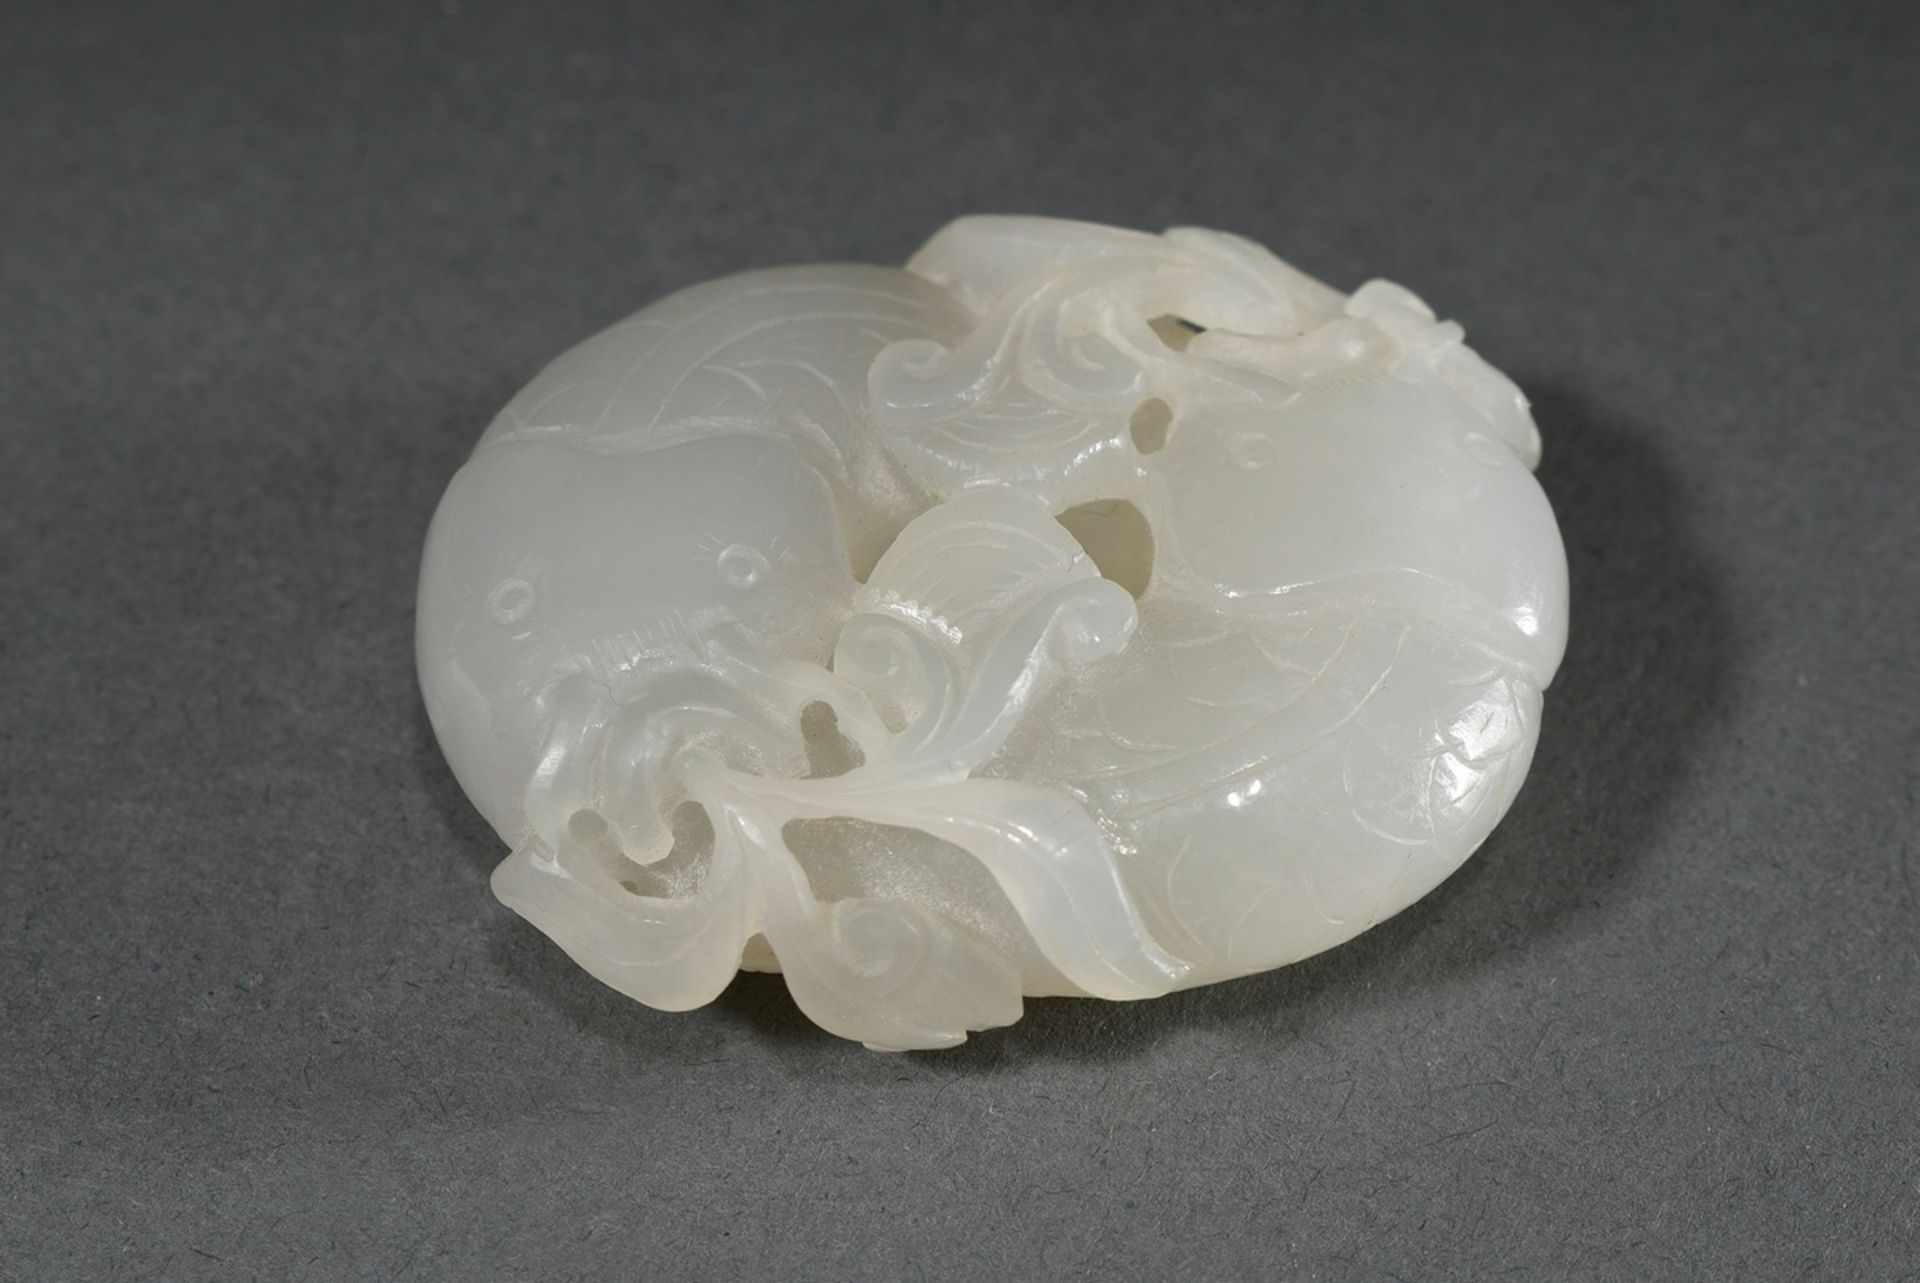 Fine light jade toggle "Two catfish and plants", China, Qing period, wooden stand, 5.3x4.2x1.5cm - Image 2 of 4